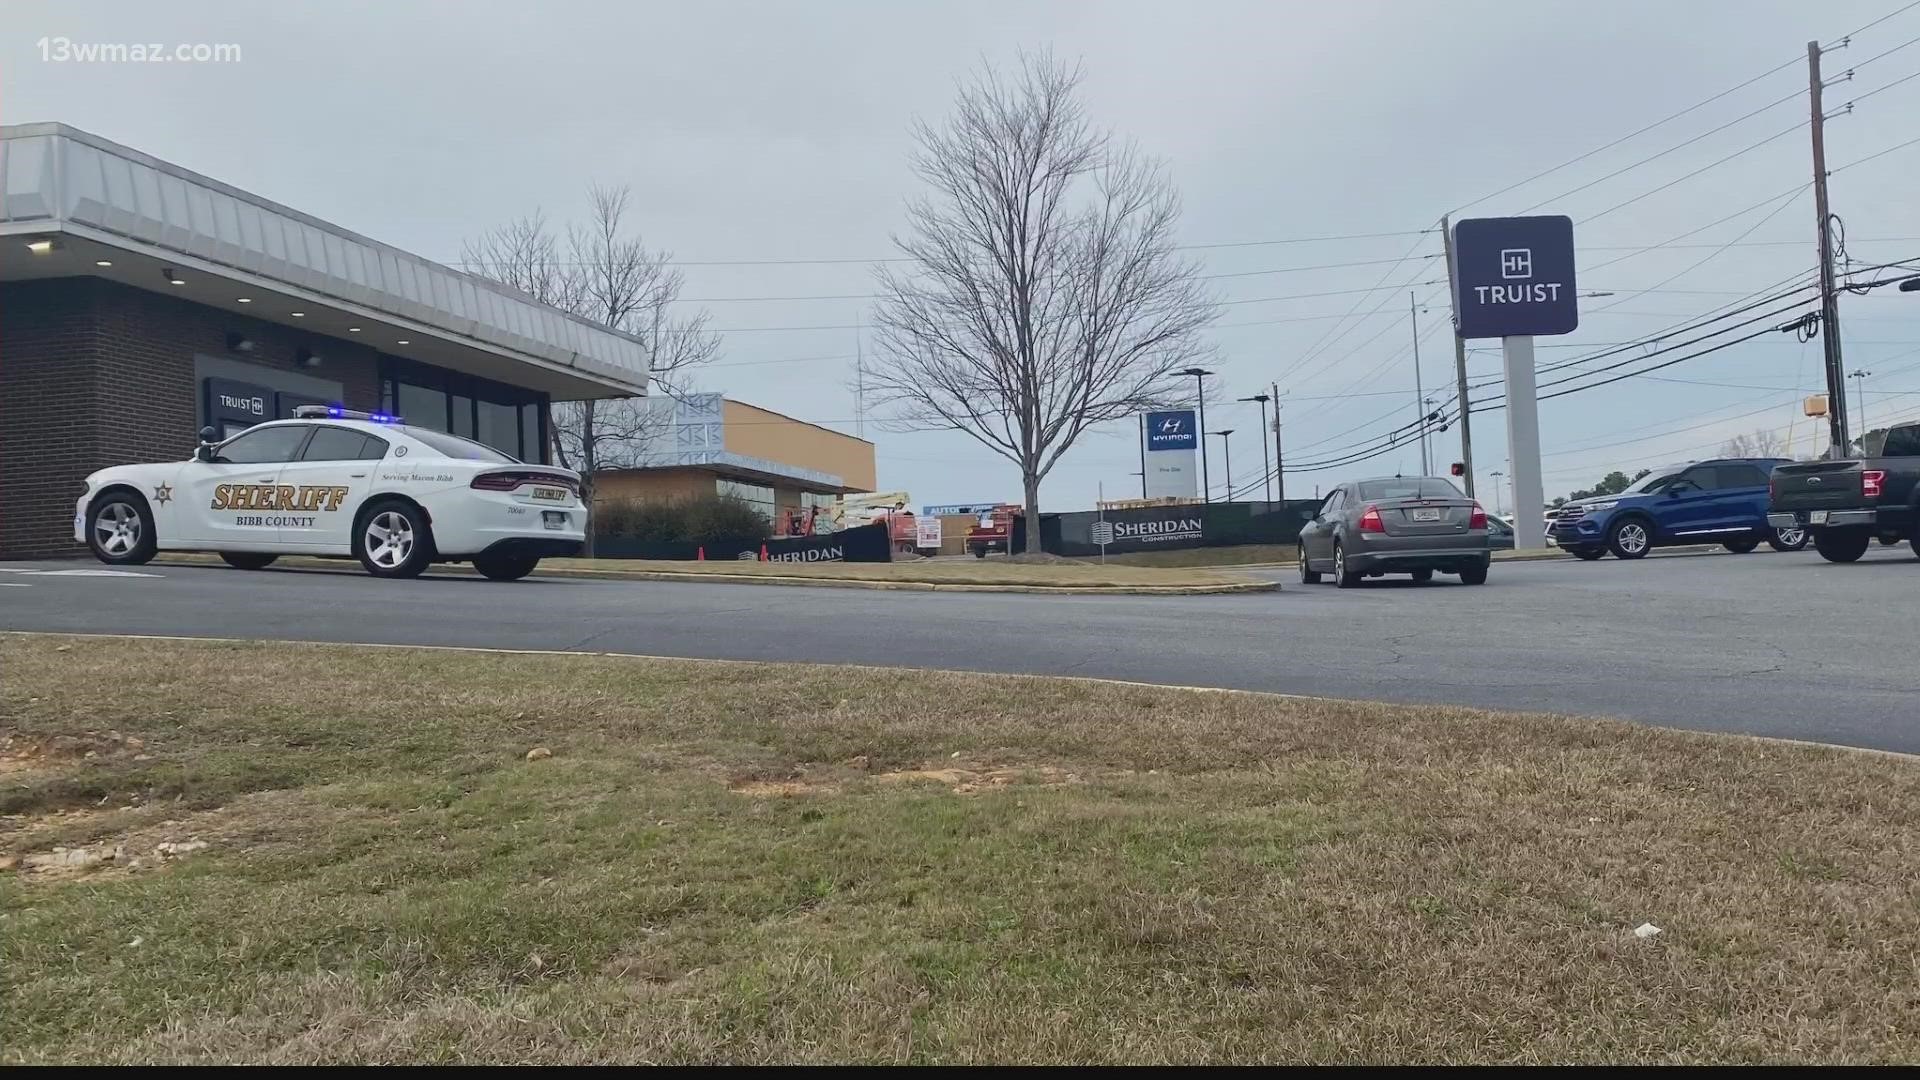 They say a man with a gun slid a note to the teller and robbed the Truist Bank on Riverside Drive.